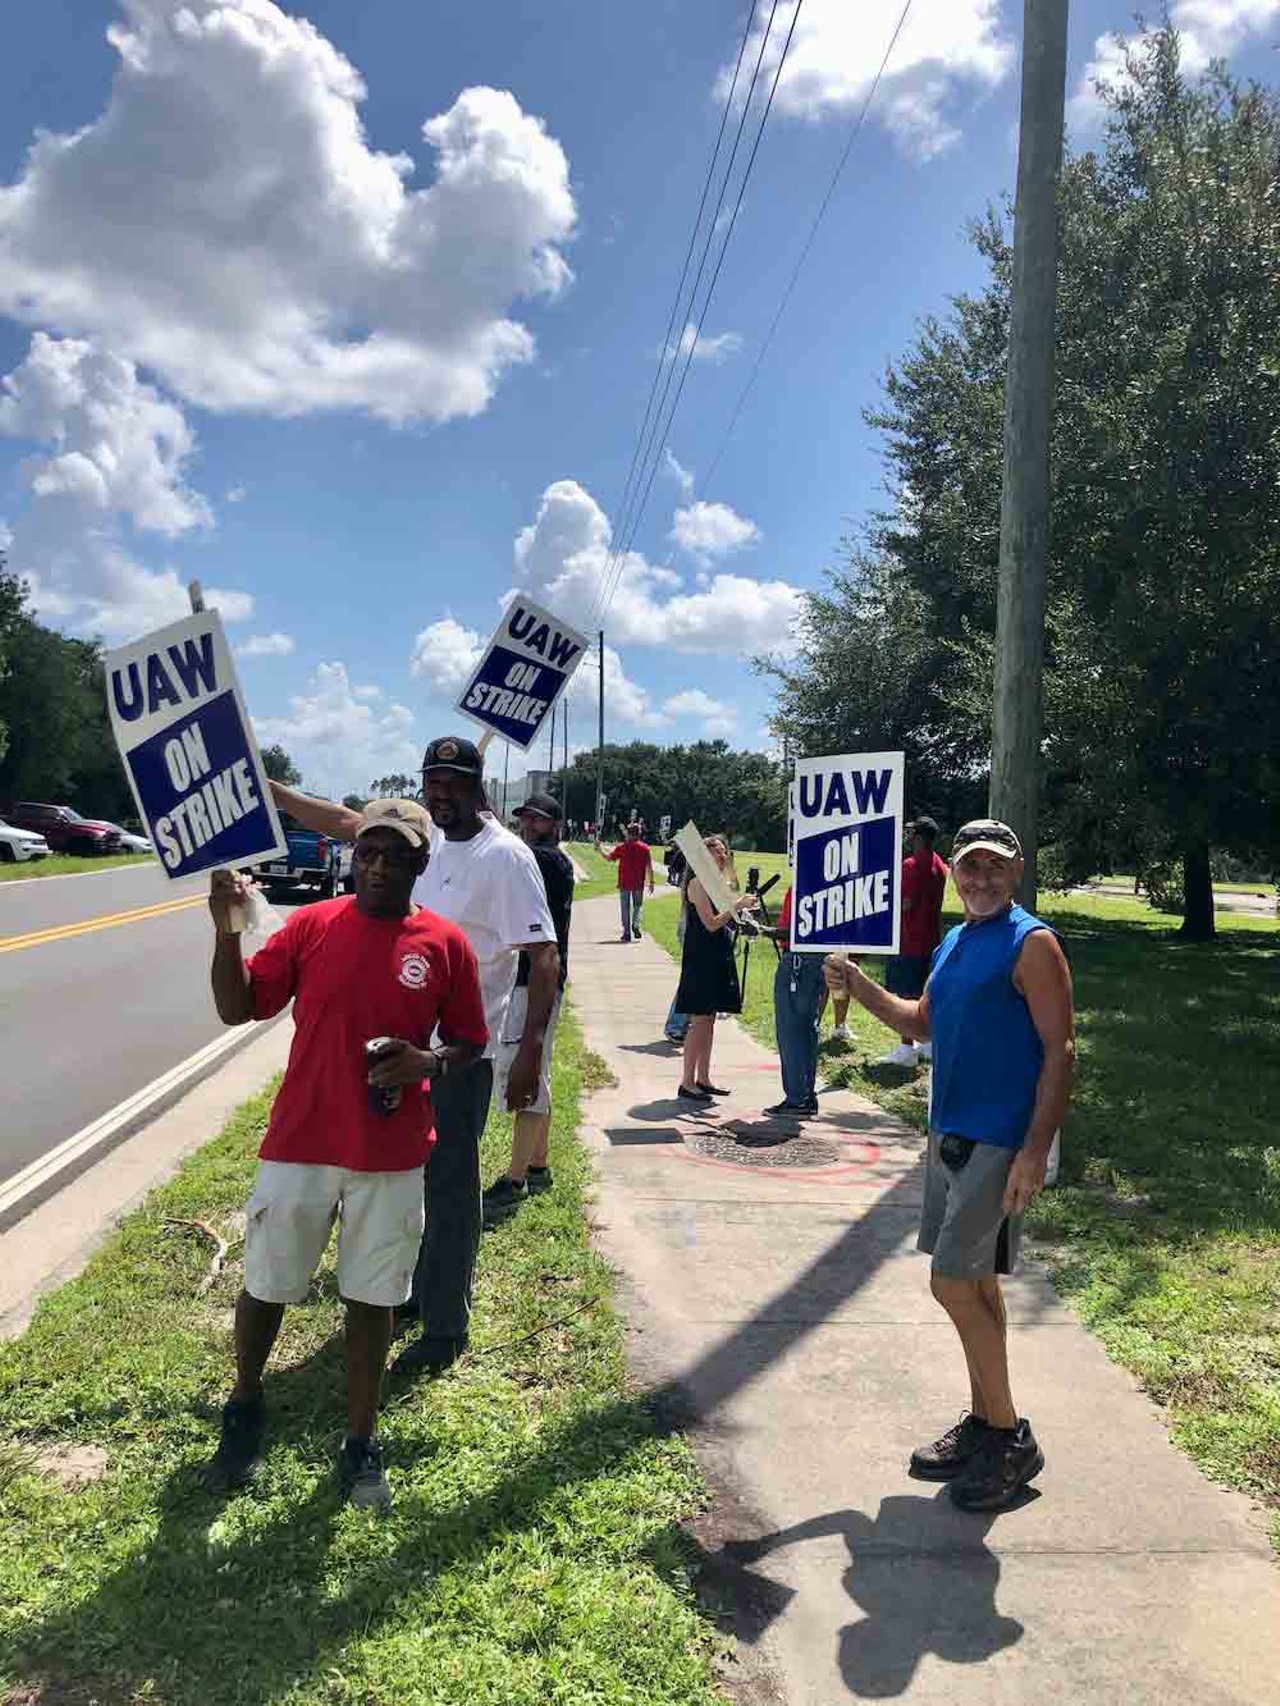 Orlando auto workers strike, joining thousands of UAW union members across the United States